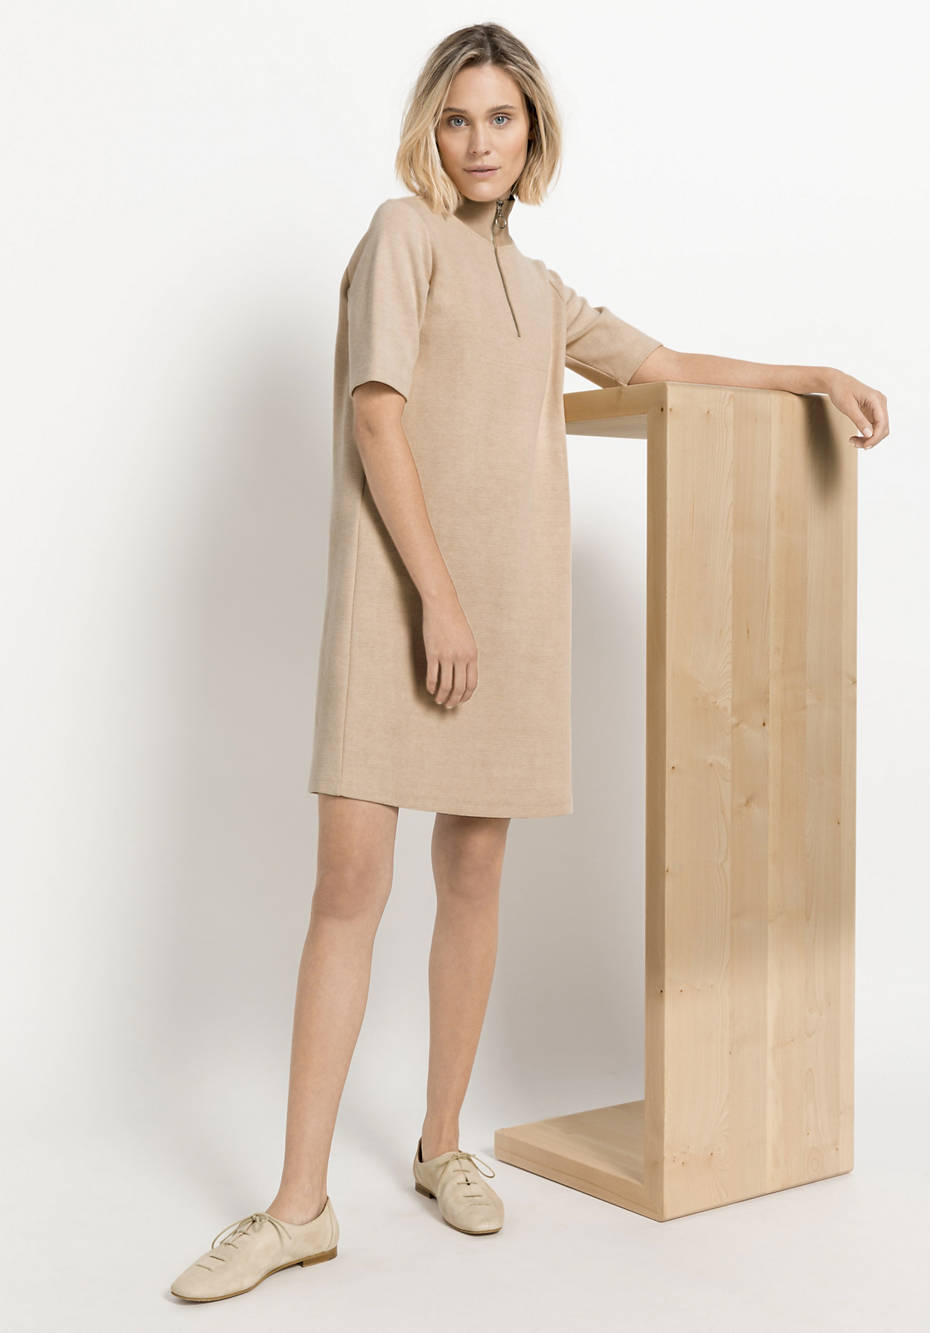 Plant-dyed dress made from organic cotton with kapok